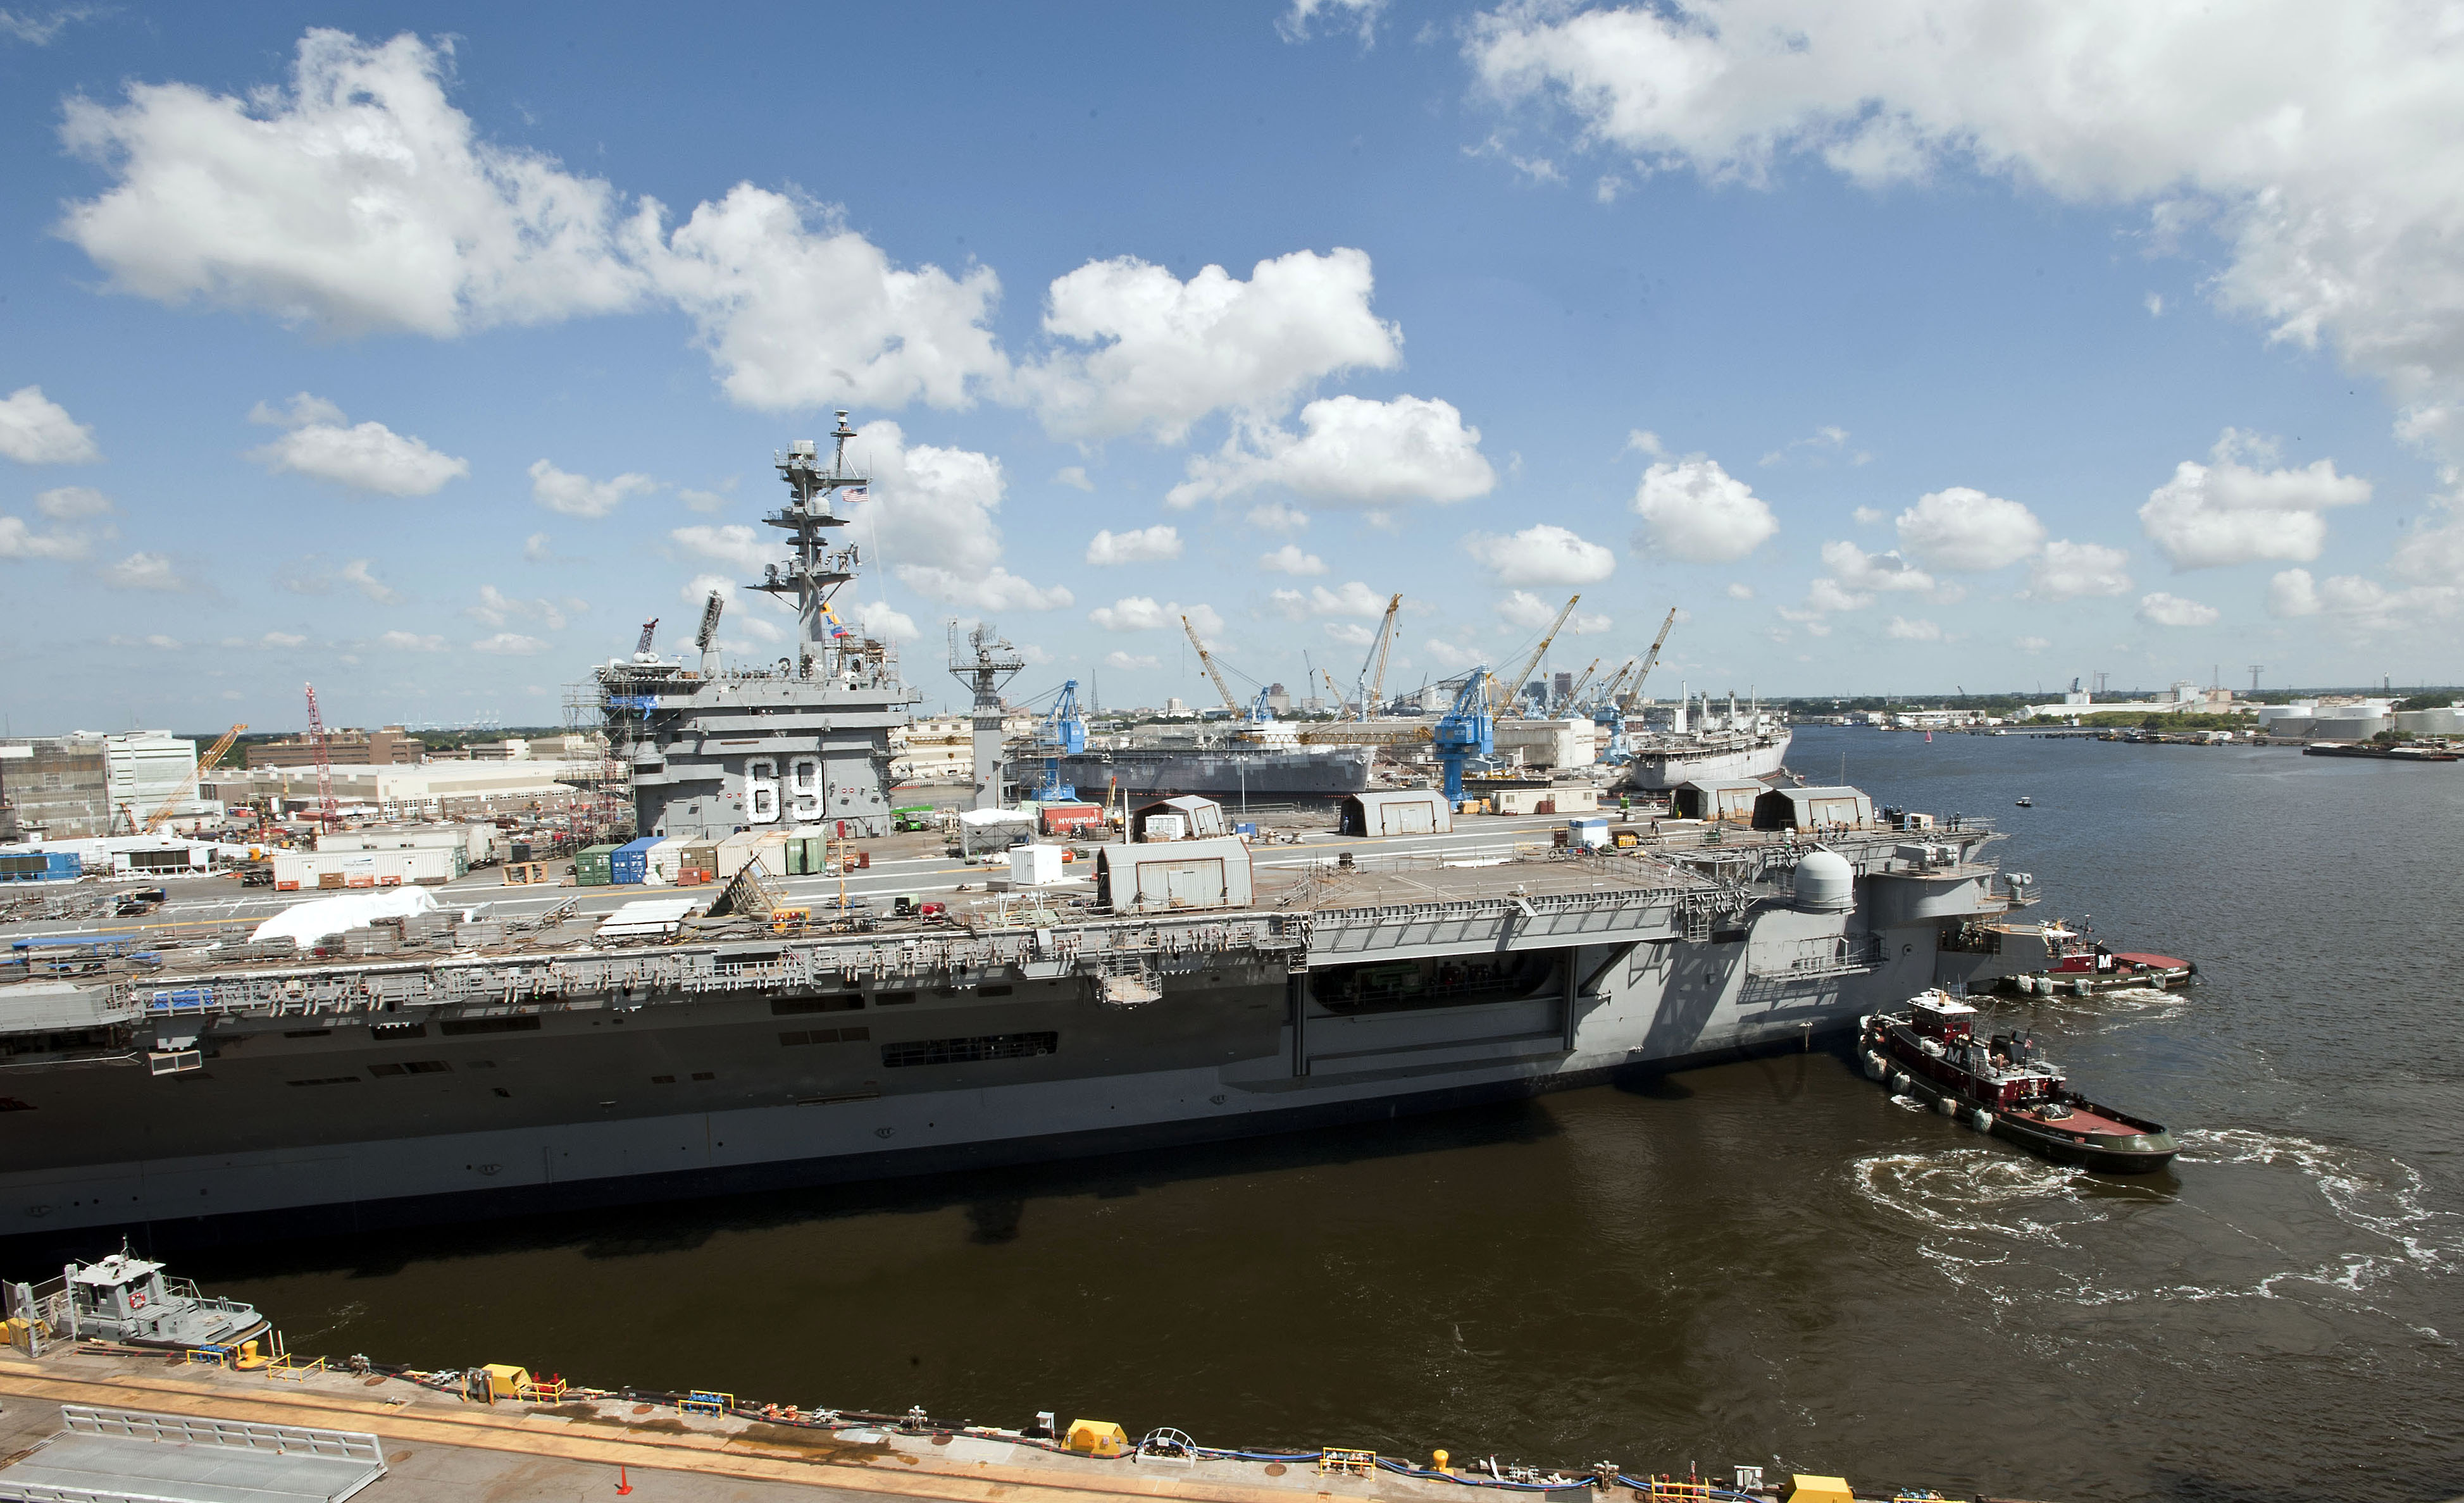 Tugboats guide the aircraft carrier USS Dwight D. Eisenhower (CVN 69) from her dry dock at Norfolk Naval Shipyard to a nearby pier following a scheduled dock flooding earlier in the morning of Aug. 26, 2014. US Navy photo.